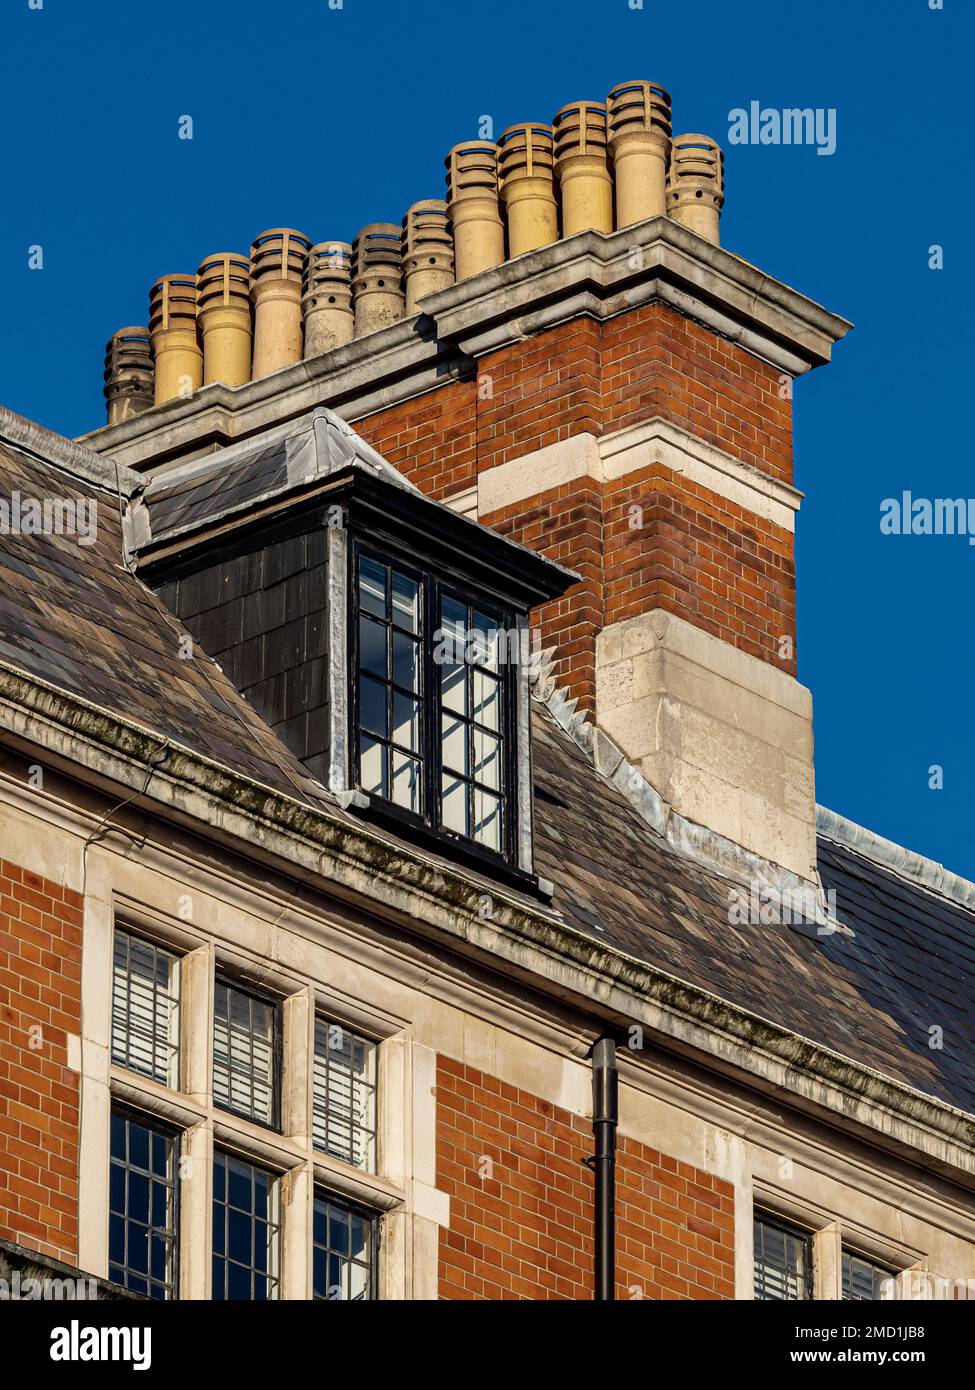 Chimney Pots London - Multiple chimney pots on a building in London's Fitzrovia district. Multiple chimneys have separate flues and each has a pot. Stock Photo